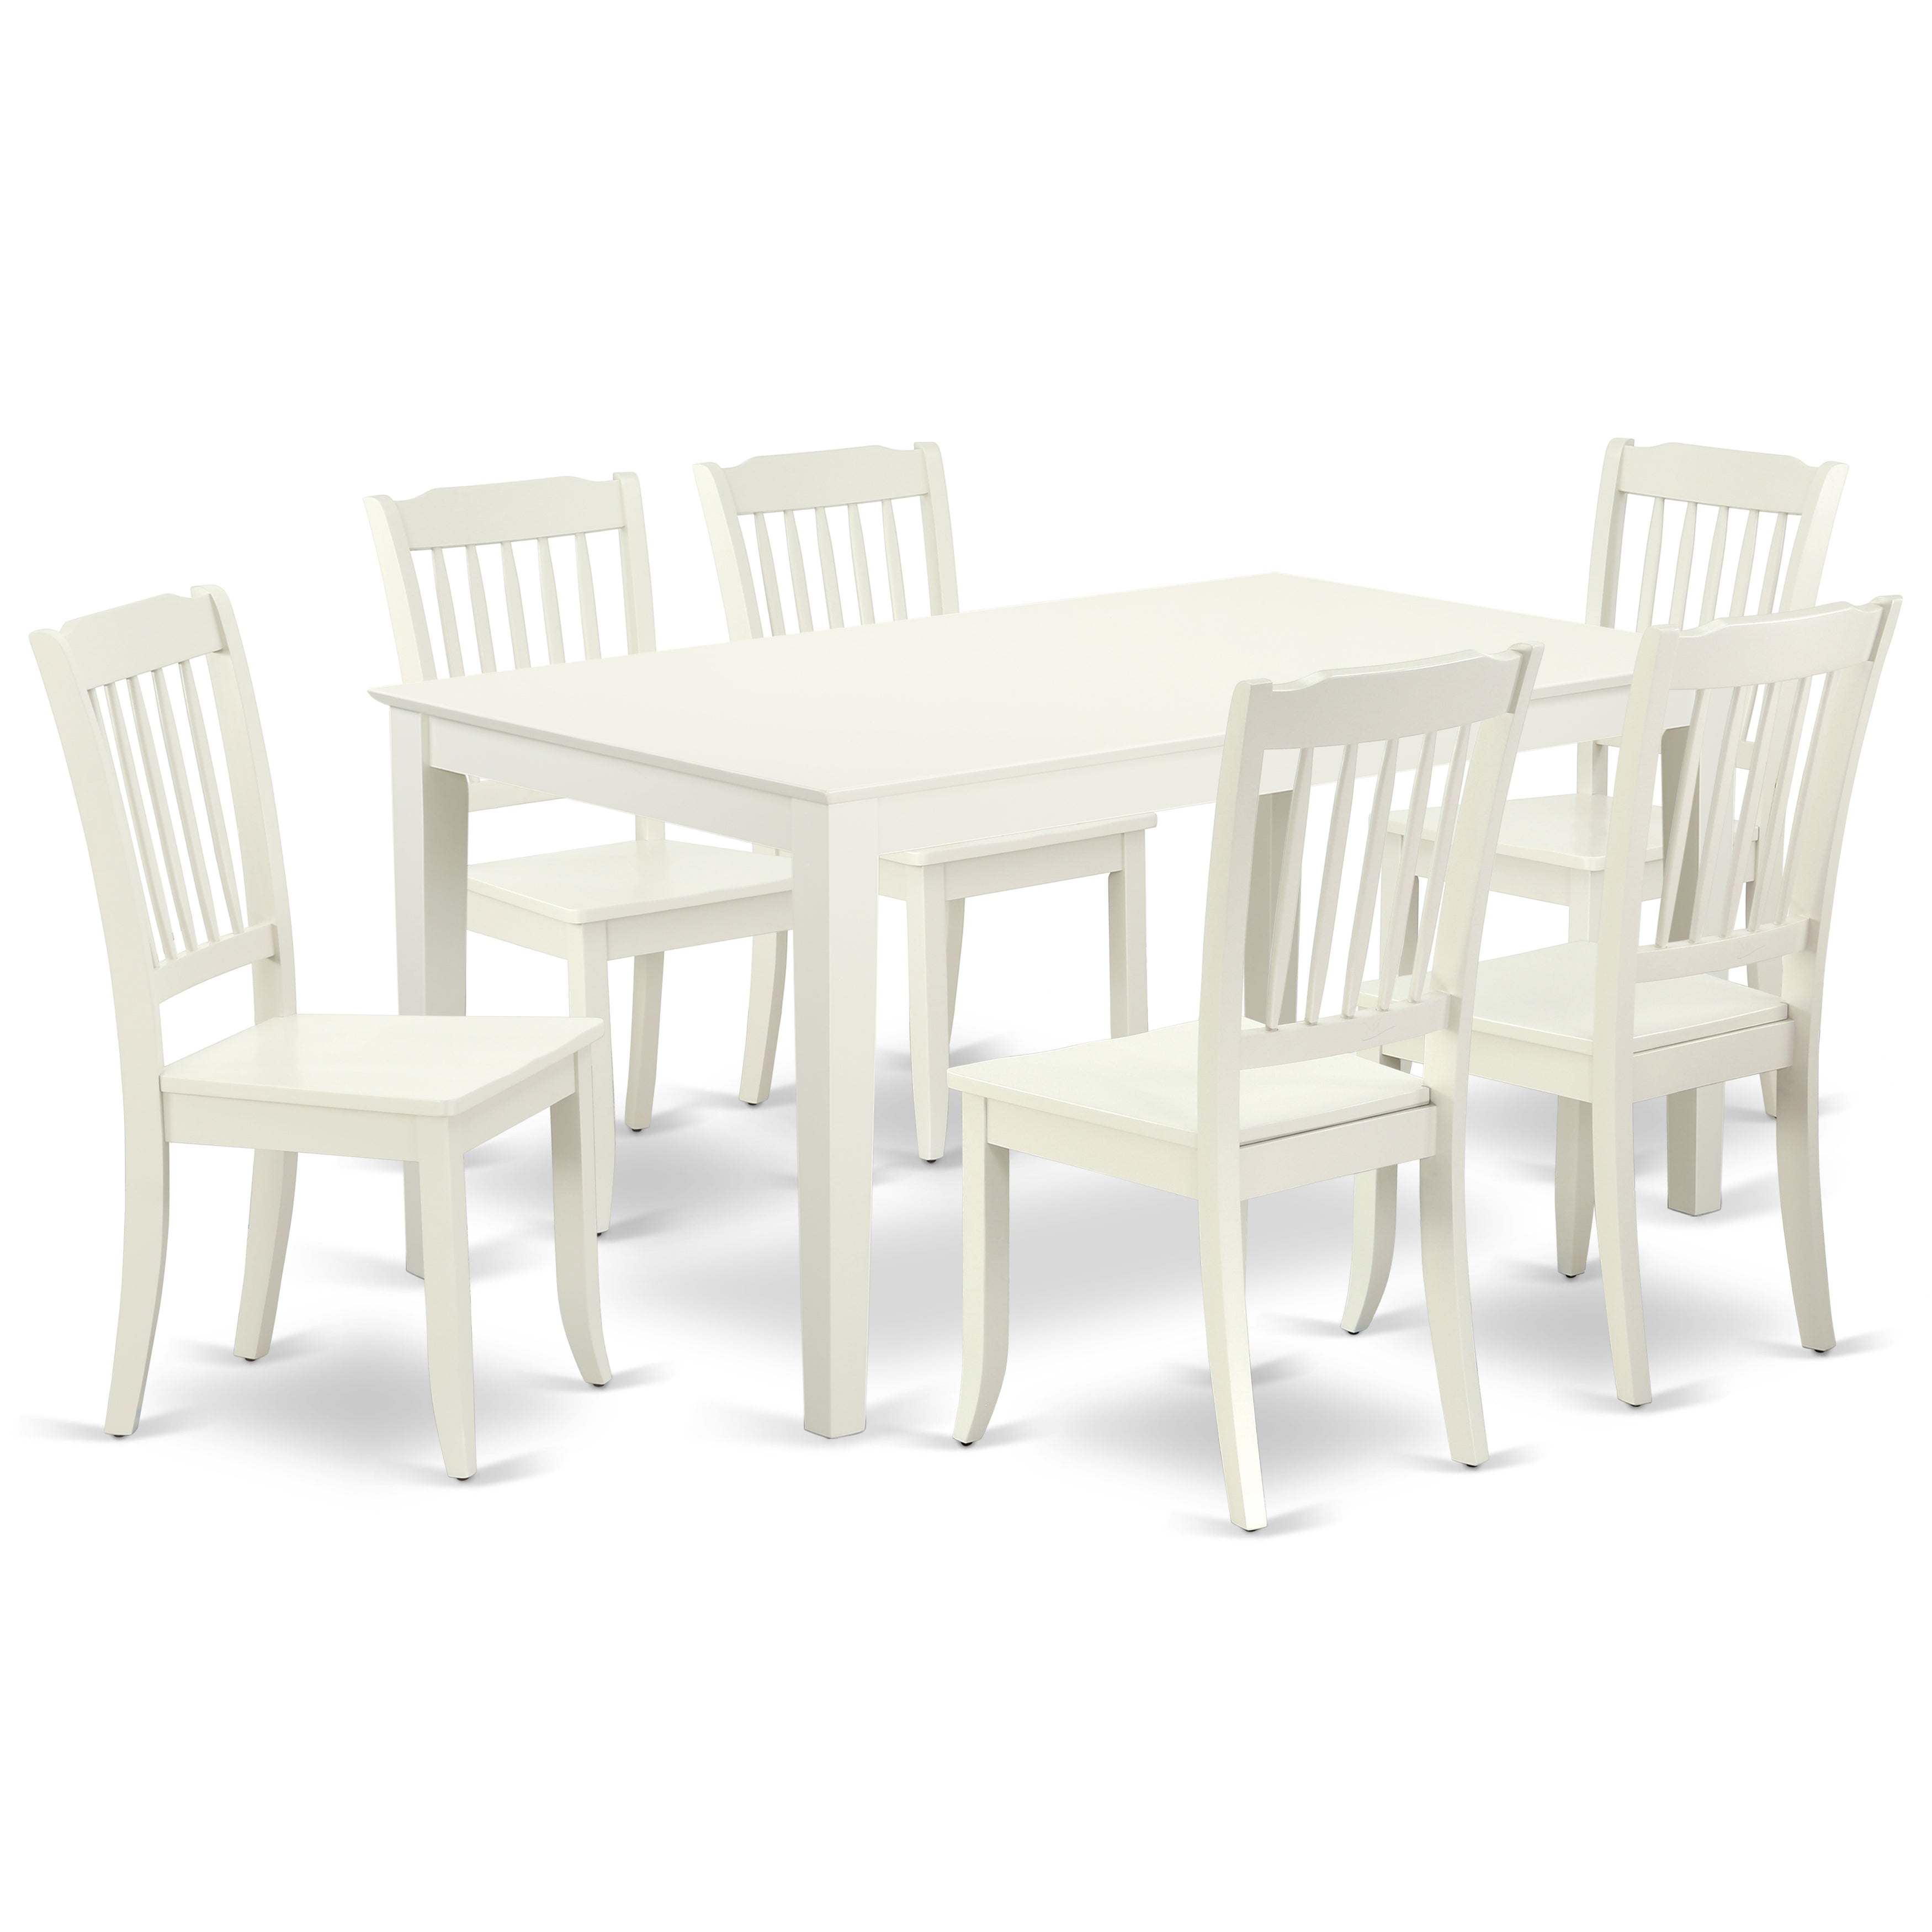 CADA7-LWH-W 7PC Rectangular 60 inch Table and 6 vertical slatted Chairs